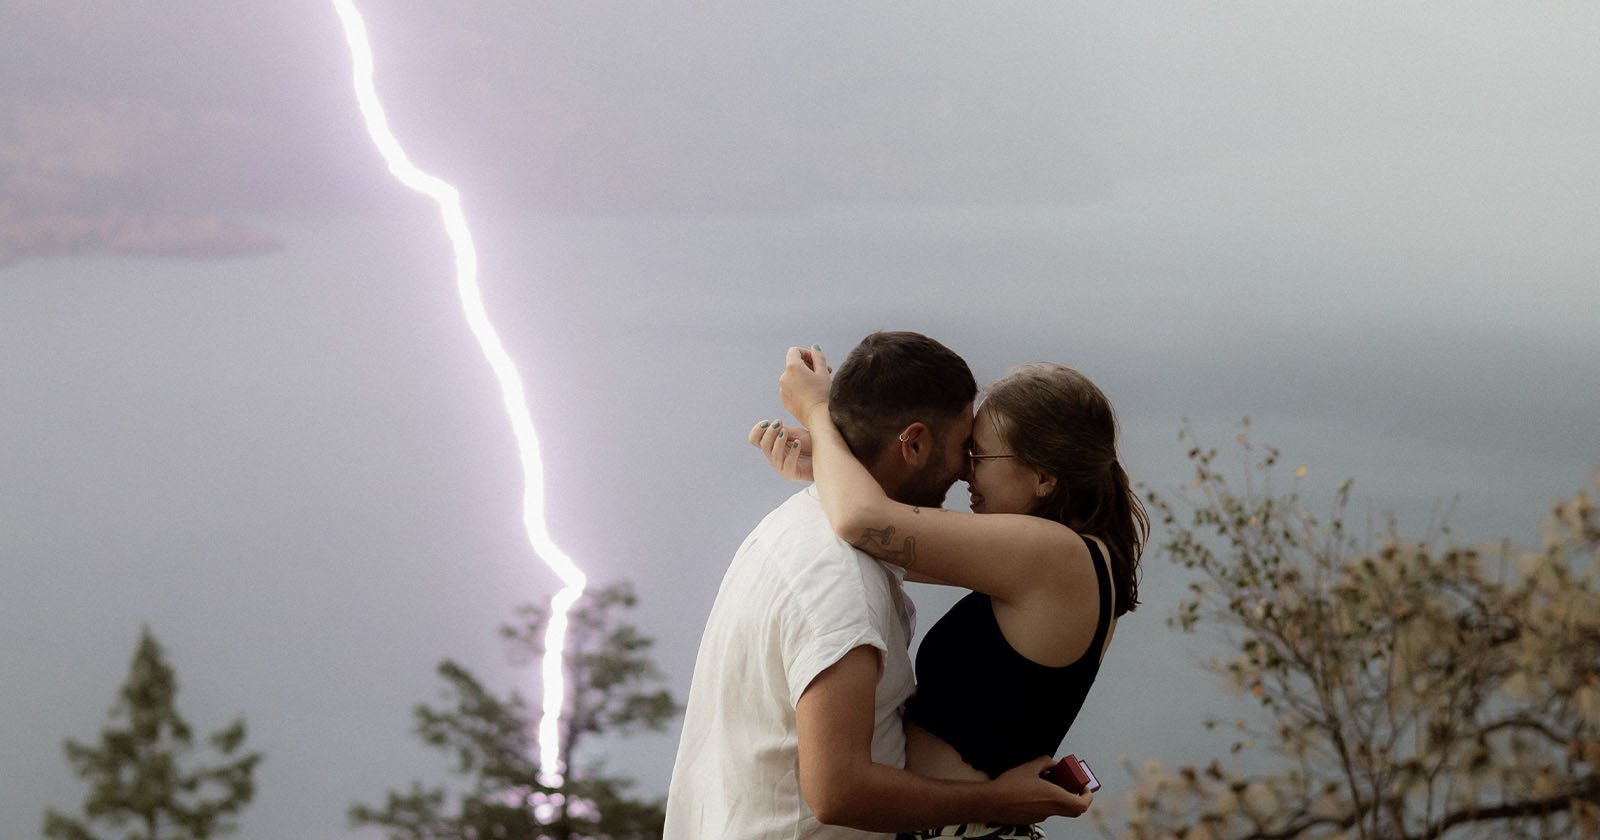 Lightning Strikes at Exact Moment Girlfriend Accepts Marriage Proposal